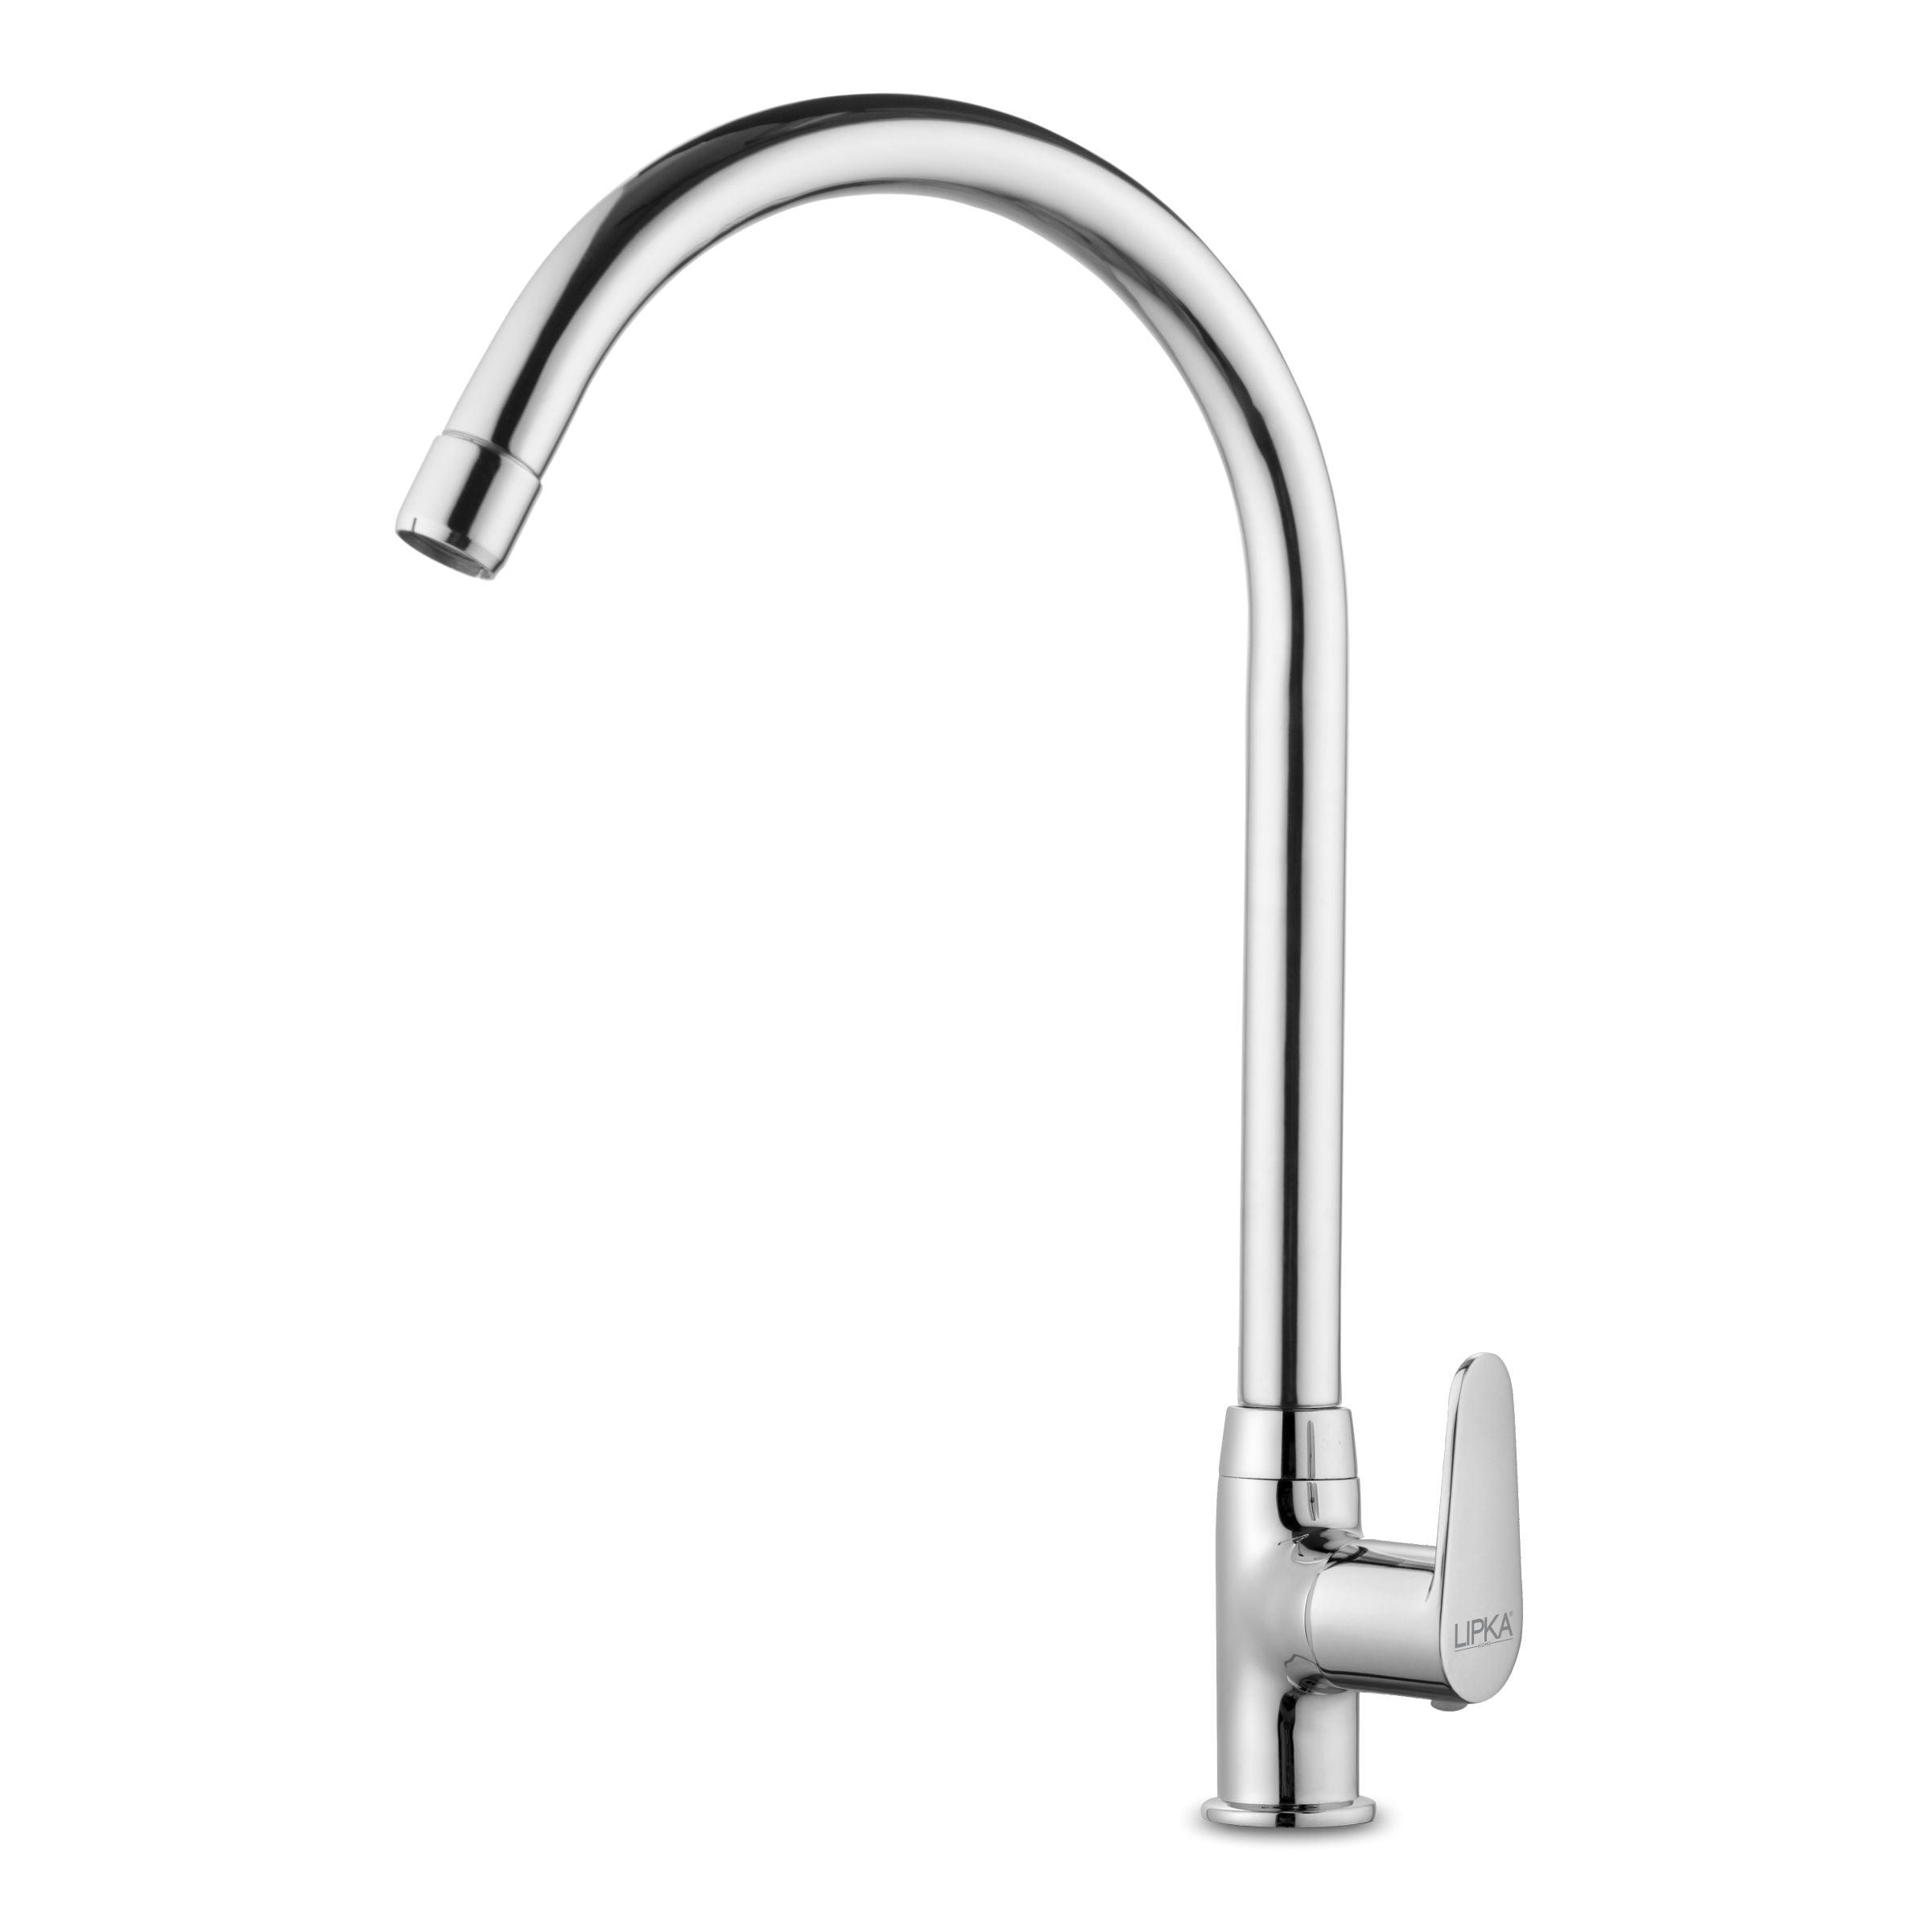 Virgo Swan Neck with Large (20 Inches) Round Swivel Spout Faucet